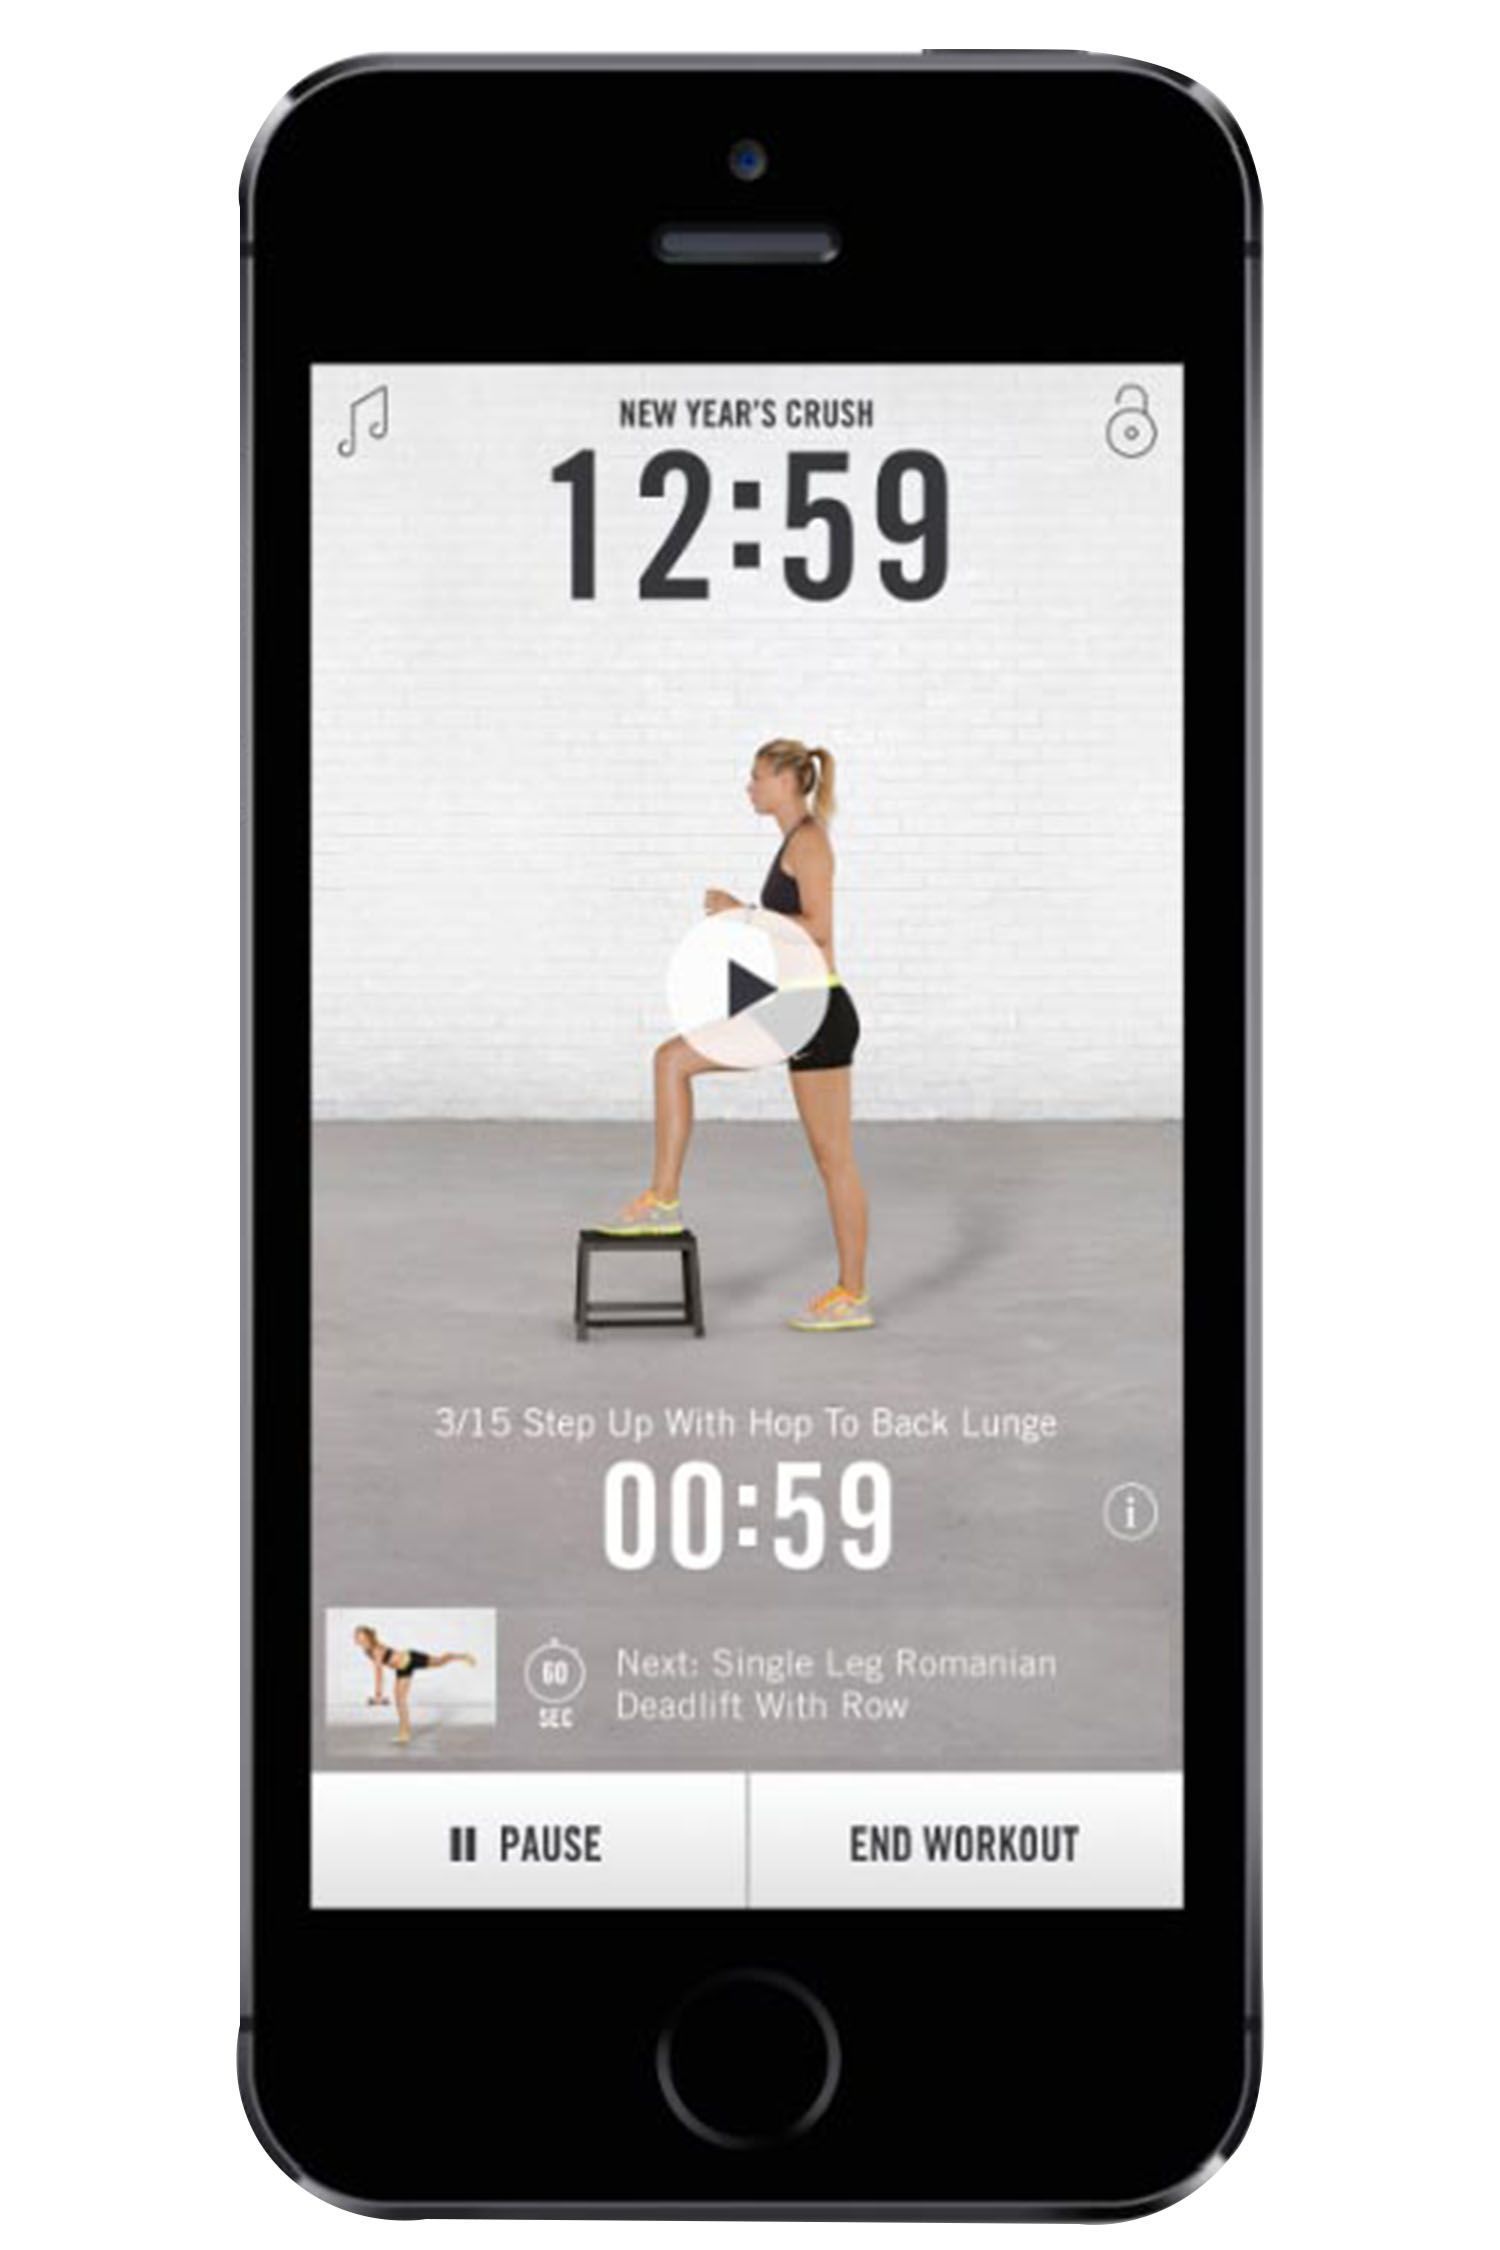 26 Workout Apps That Want You to Exercise at Home for Free During the Coronavirus Outbreak - 26 Workout Apps That Want You to Exercise at Home for Free During the Coronavirus Outbreak -   16 fitness Training app ideas